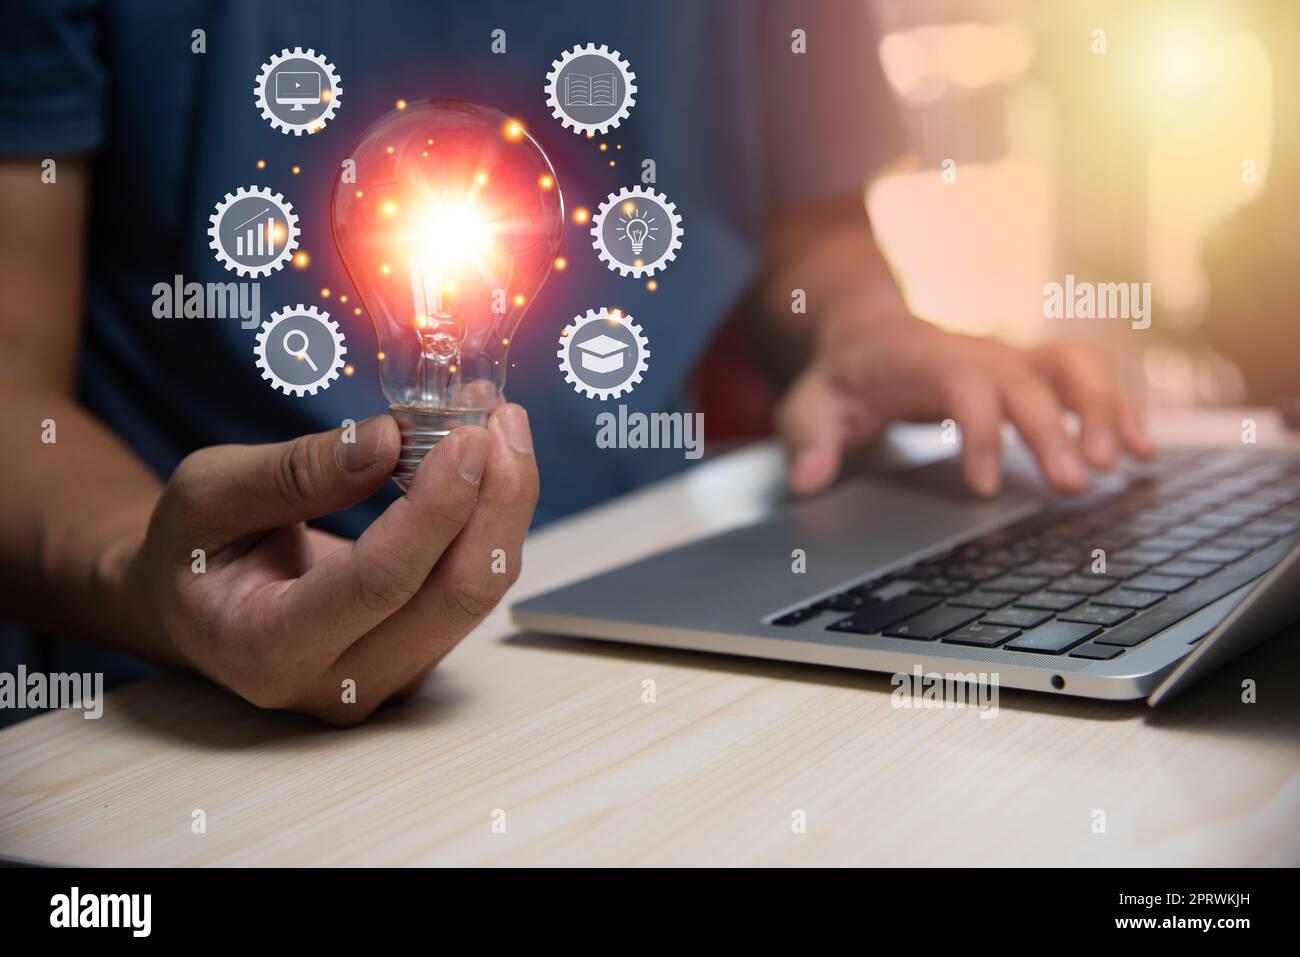 invention innovation bulb business technology lamp light connection education electricity businessman holding energy interaction features internet power. Stock Photo